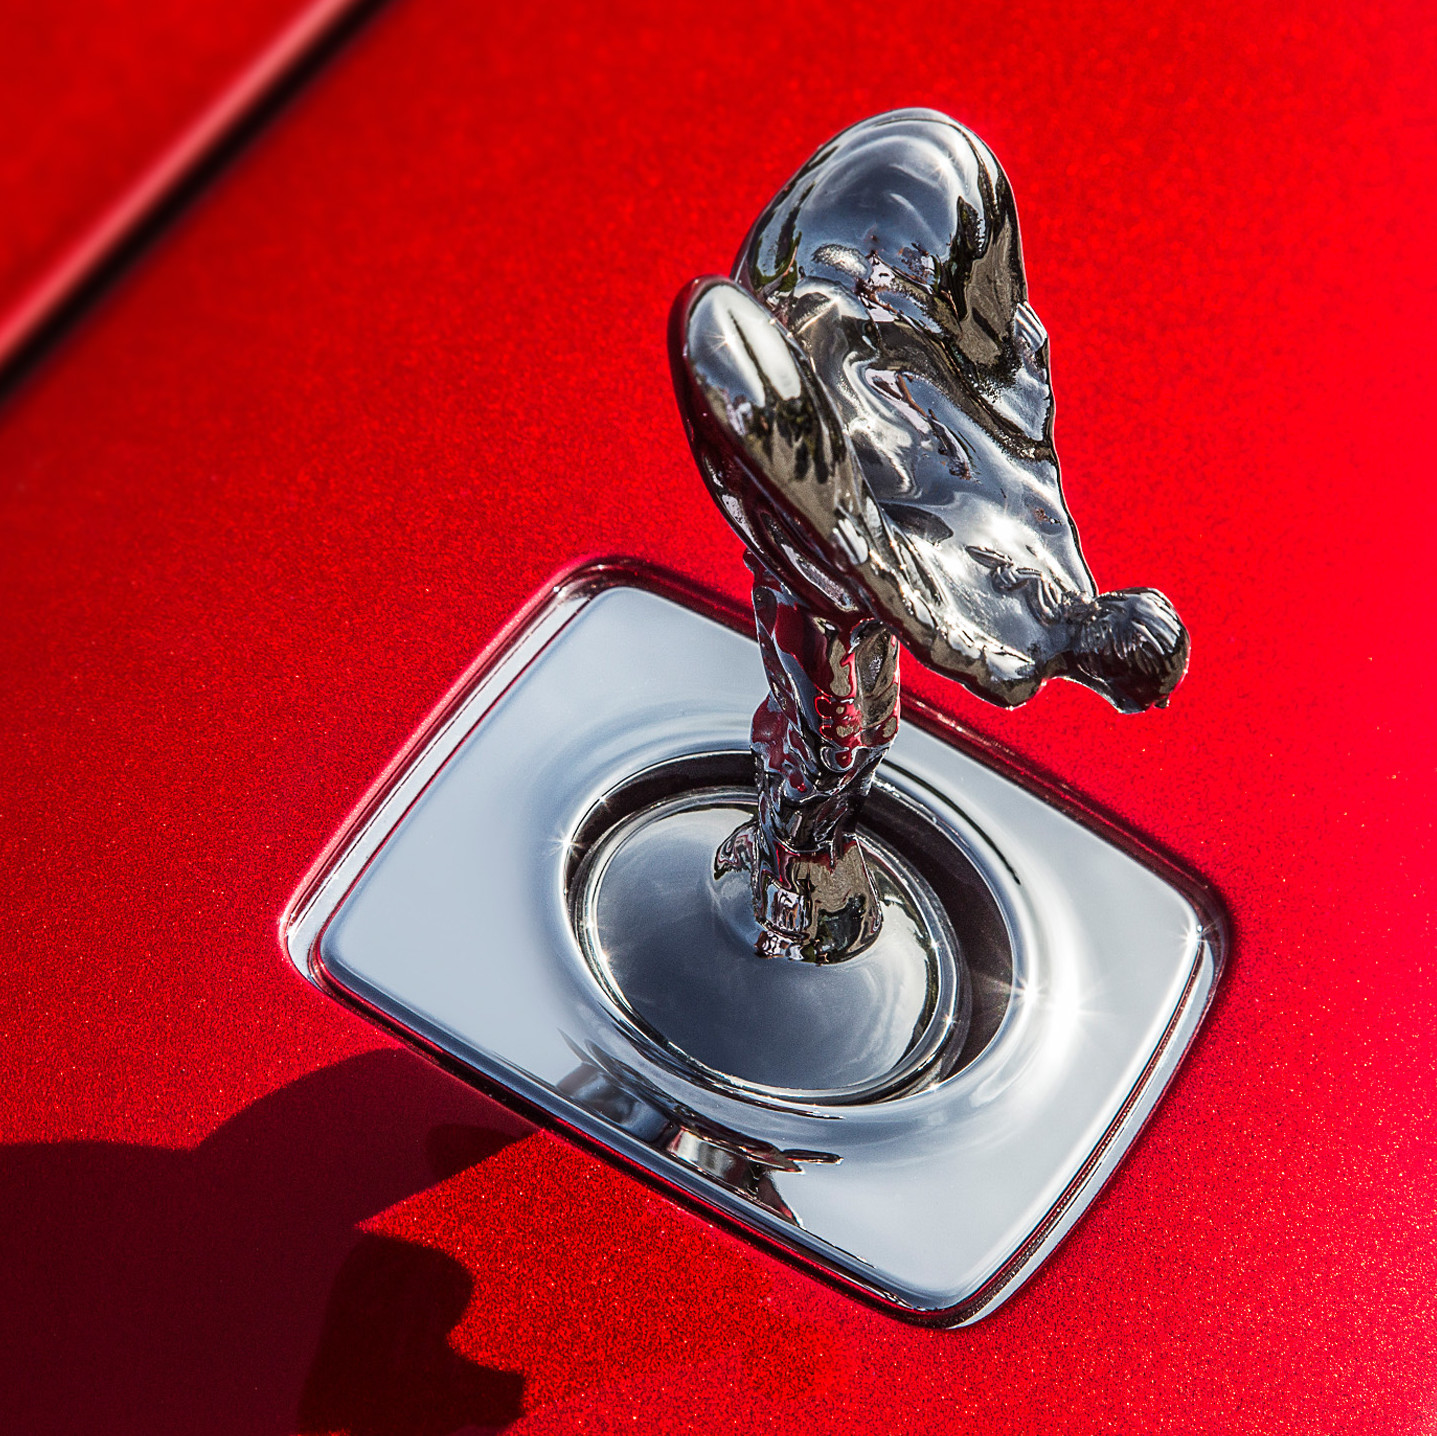 Rolls Royce Hood Ornament on red background